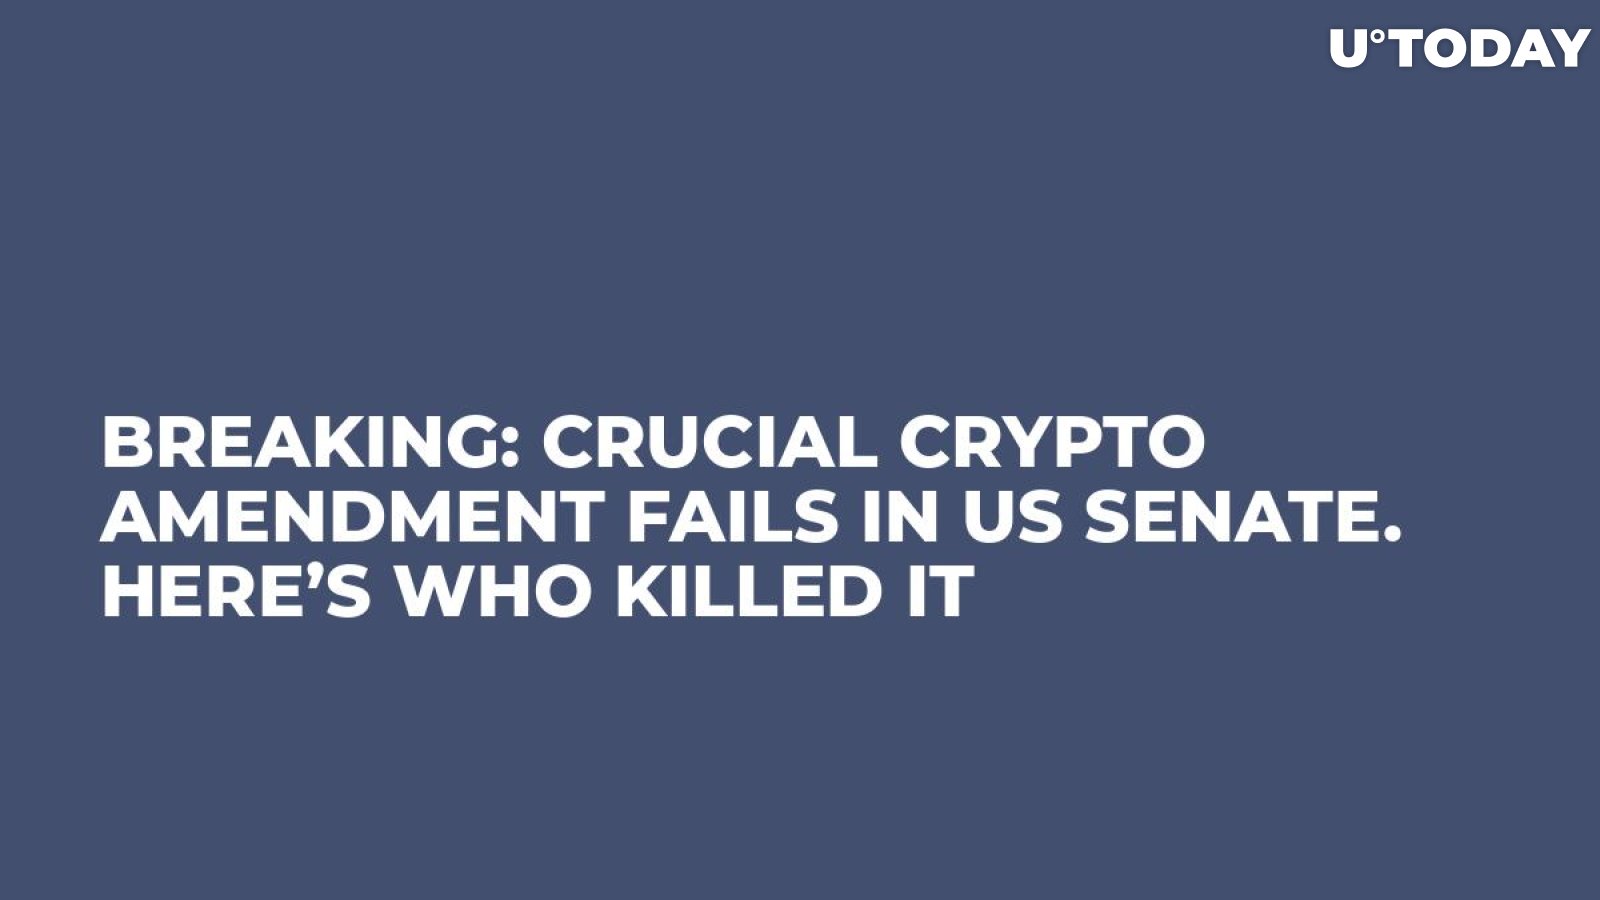 BREAKING: Crucial Crypto Amendment Fails in US Senate. Here’s Who Killed It